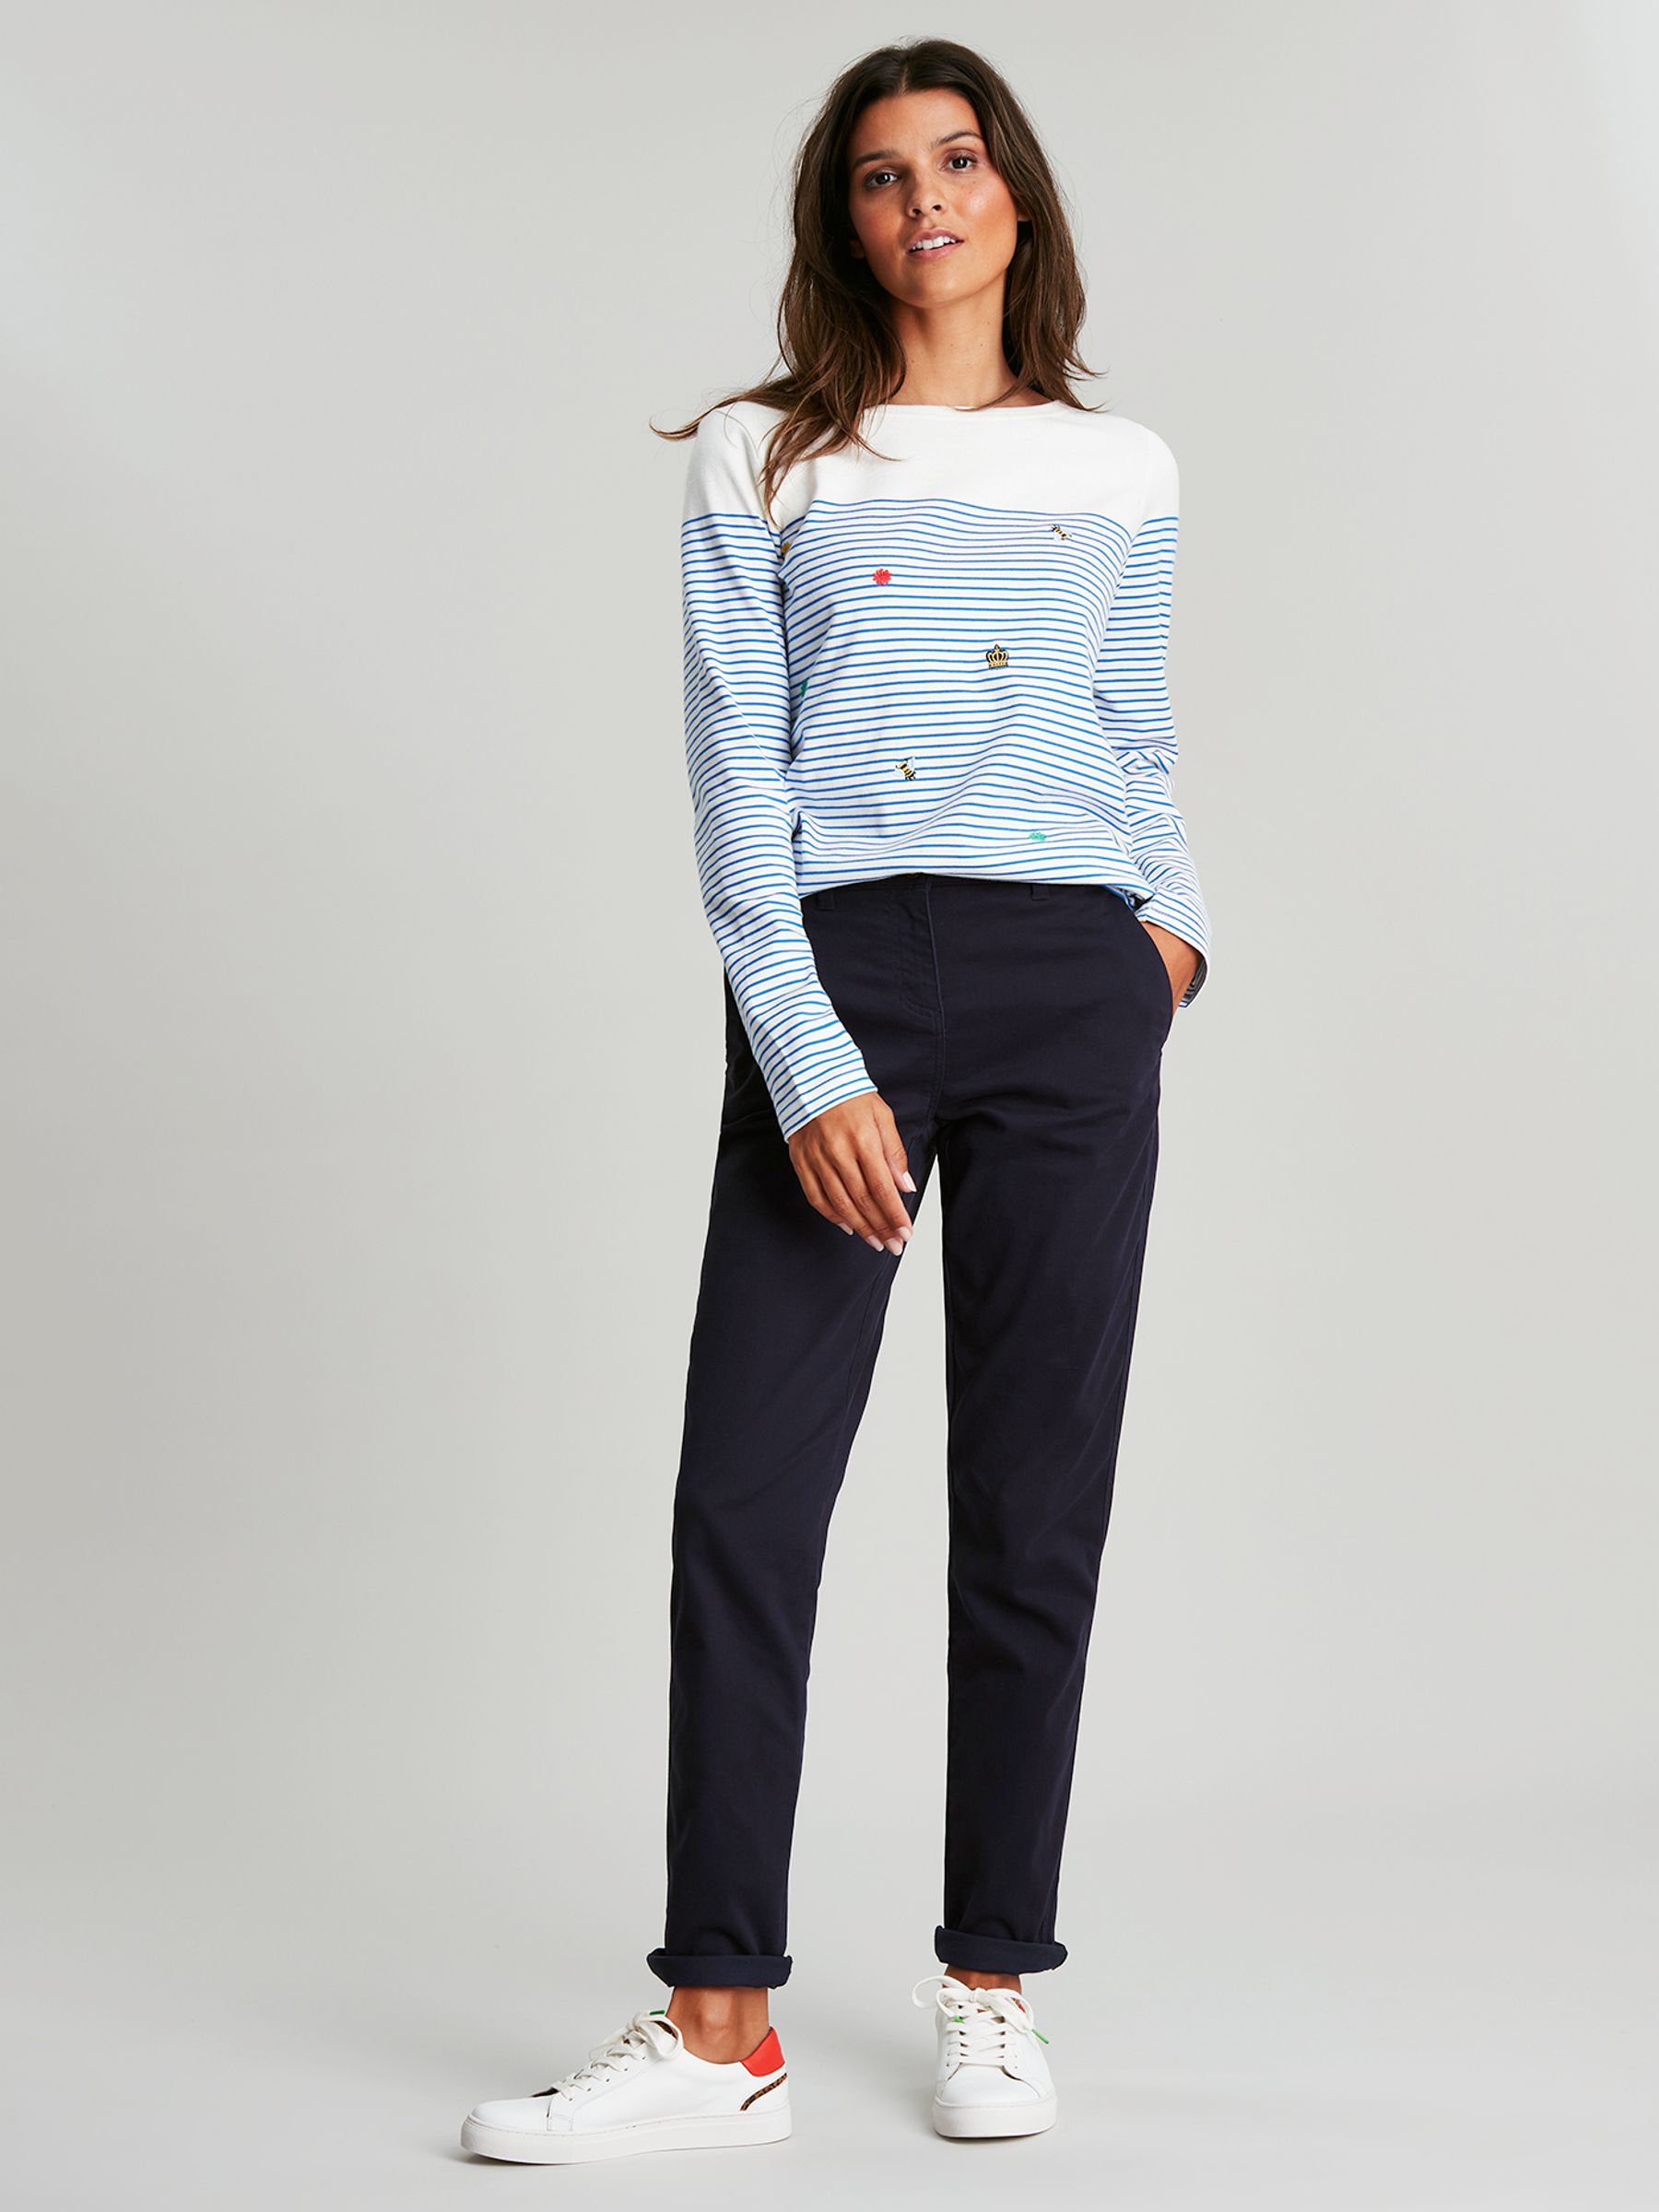 Buy Joules Blue Hesford Chinos from the Joules online shop